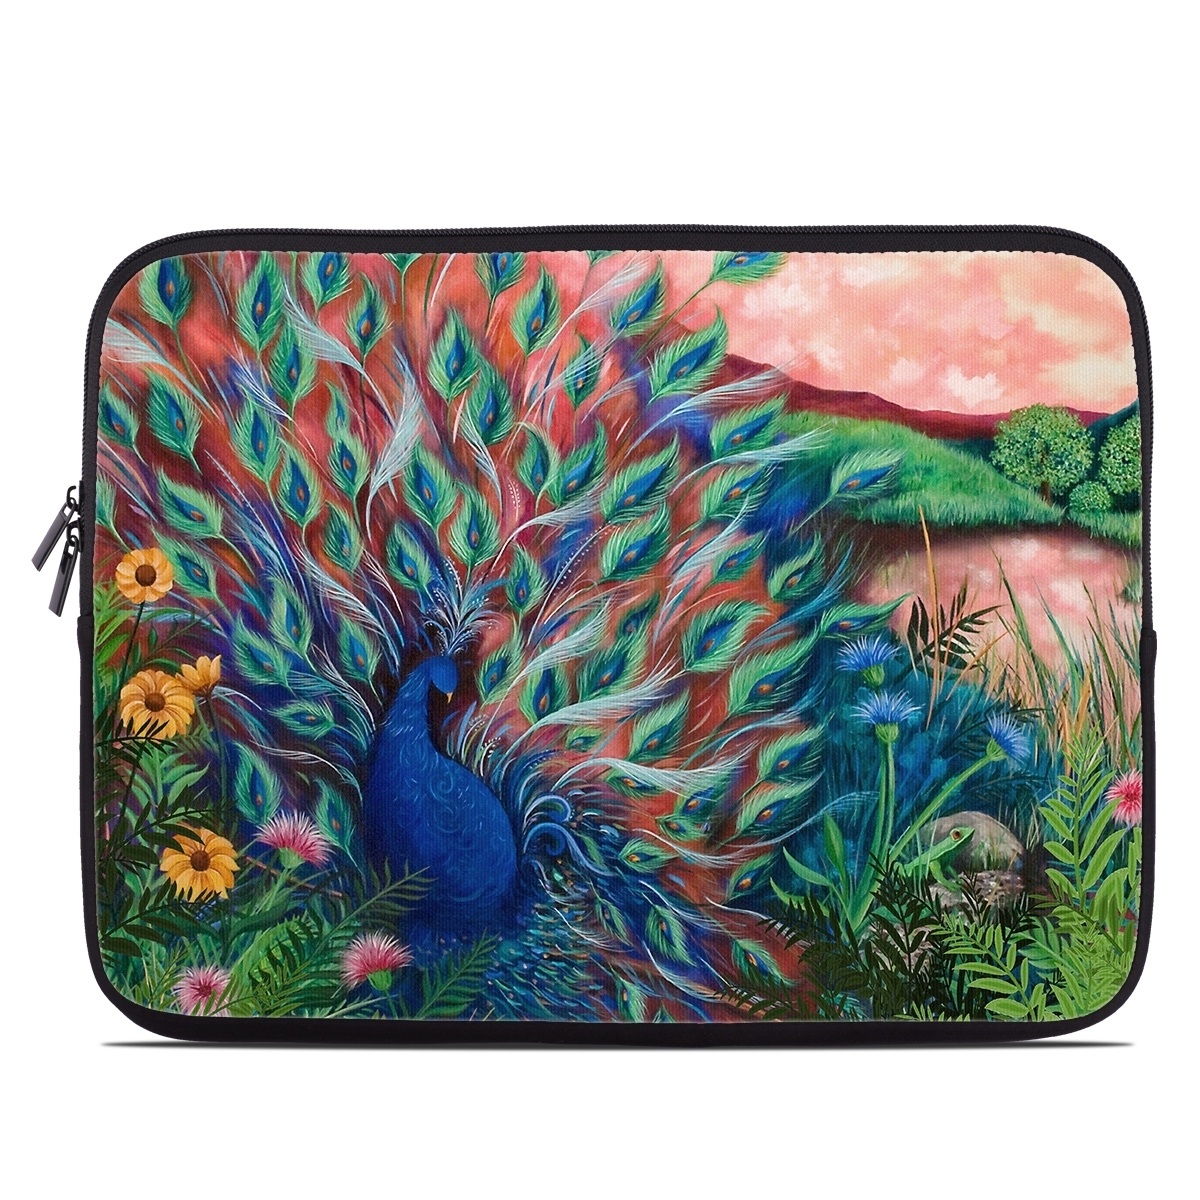 Laptop Sleeve - Coral Peacock (Image 1)